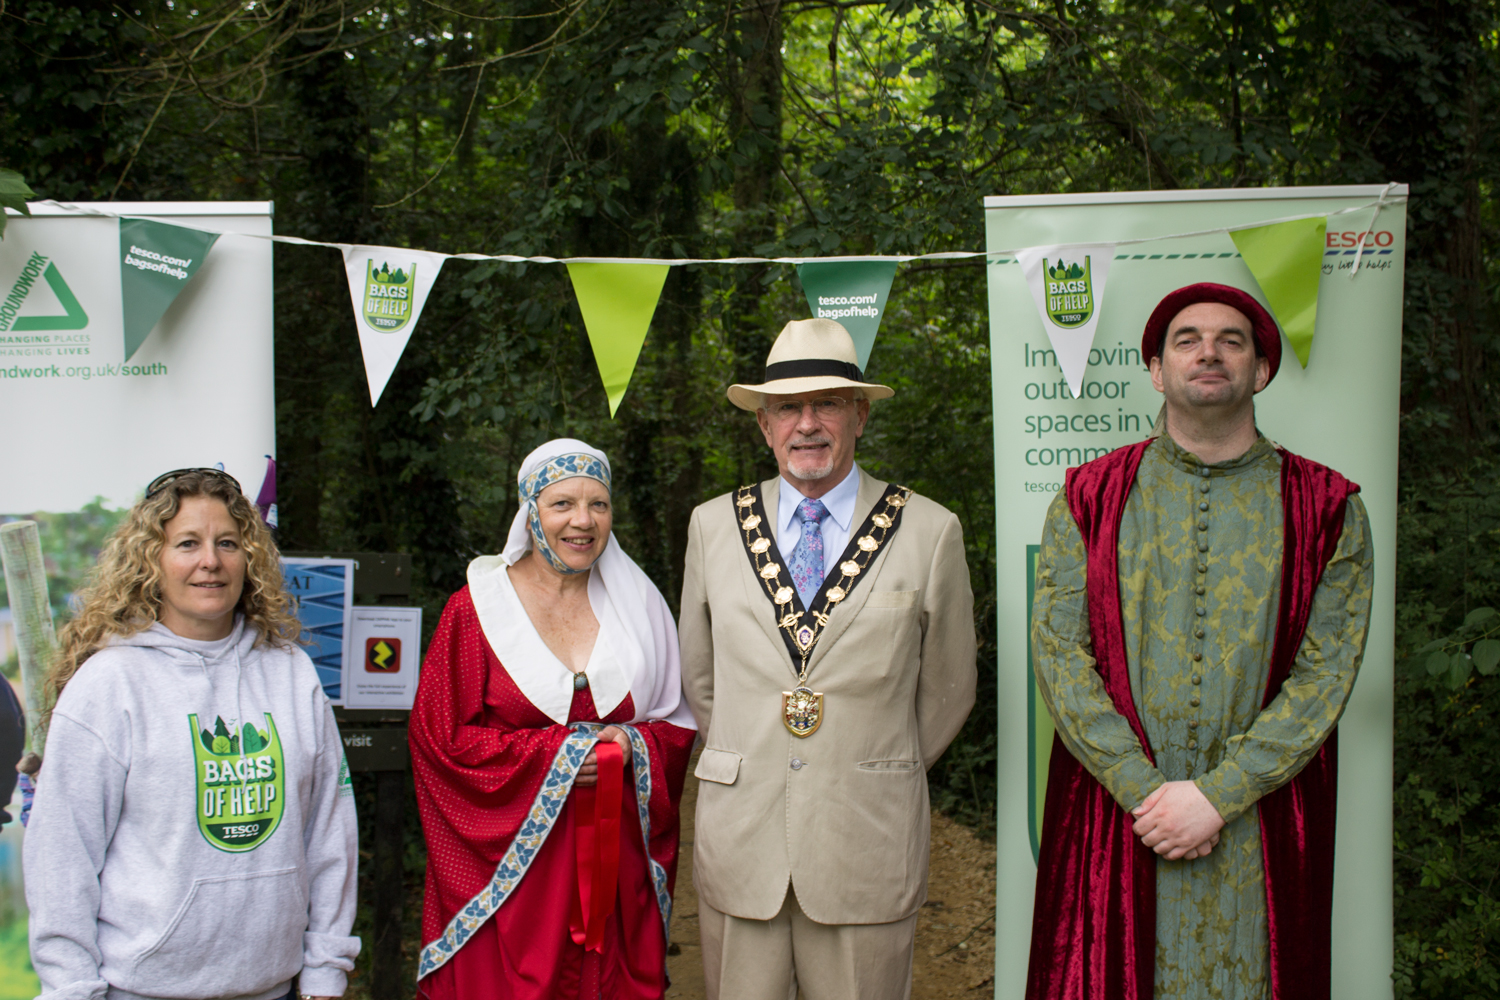 Big Turn Out For Launch of New Interactive Trail at Medieval Weekend